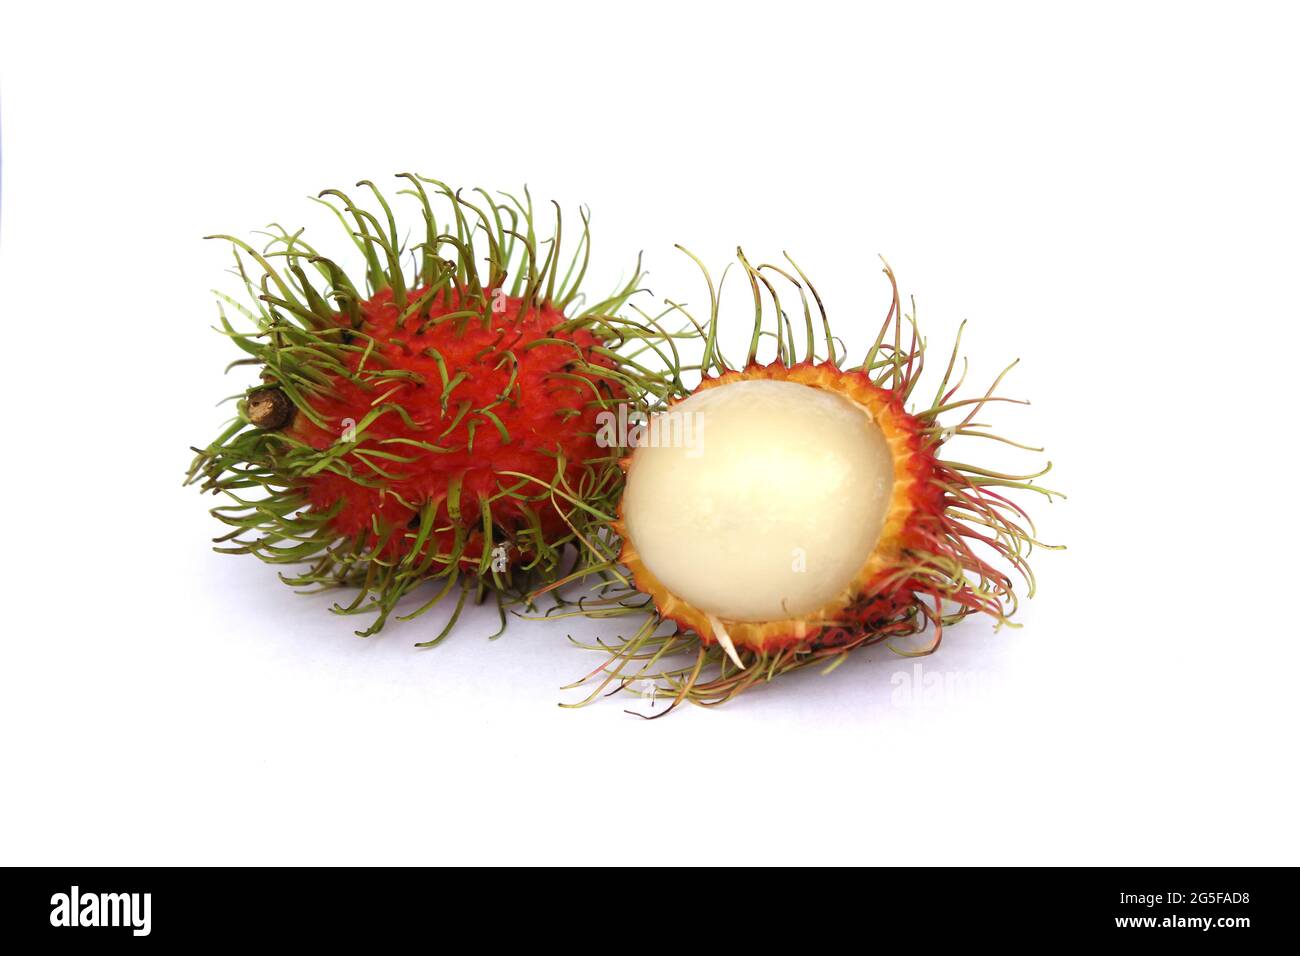 Sweet rambutans are peeled and placed separately on a white background, revealing the pulp of the fruit inside. Stock Photo